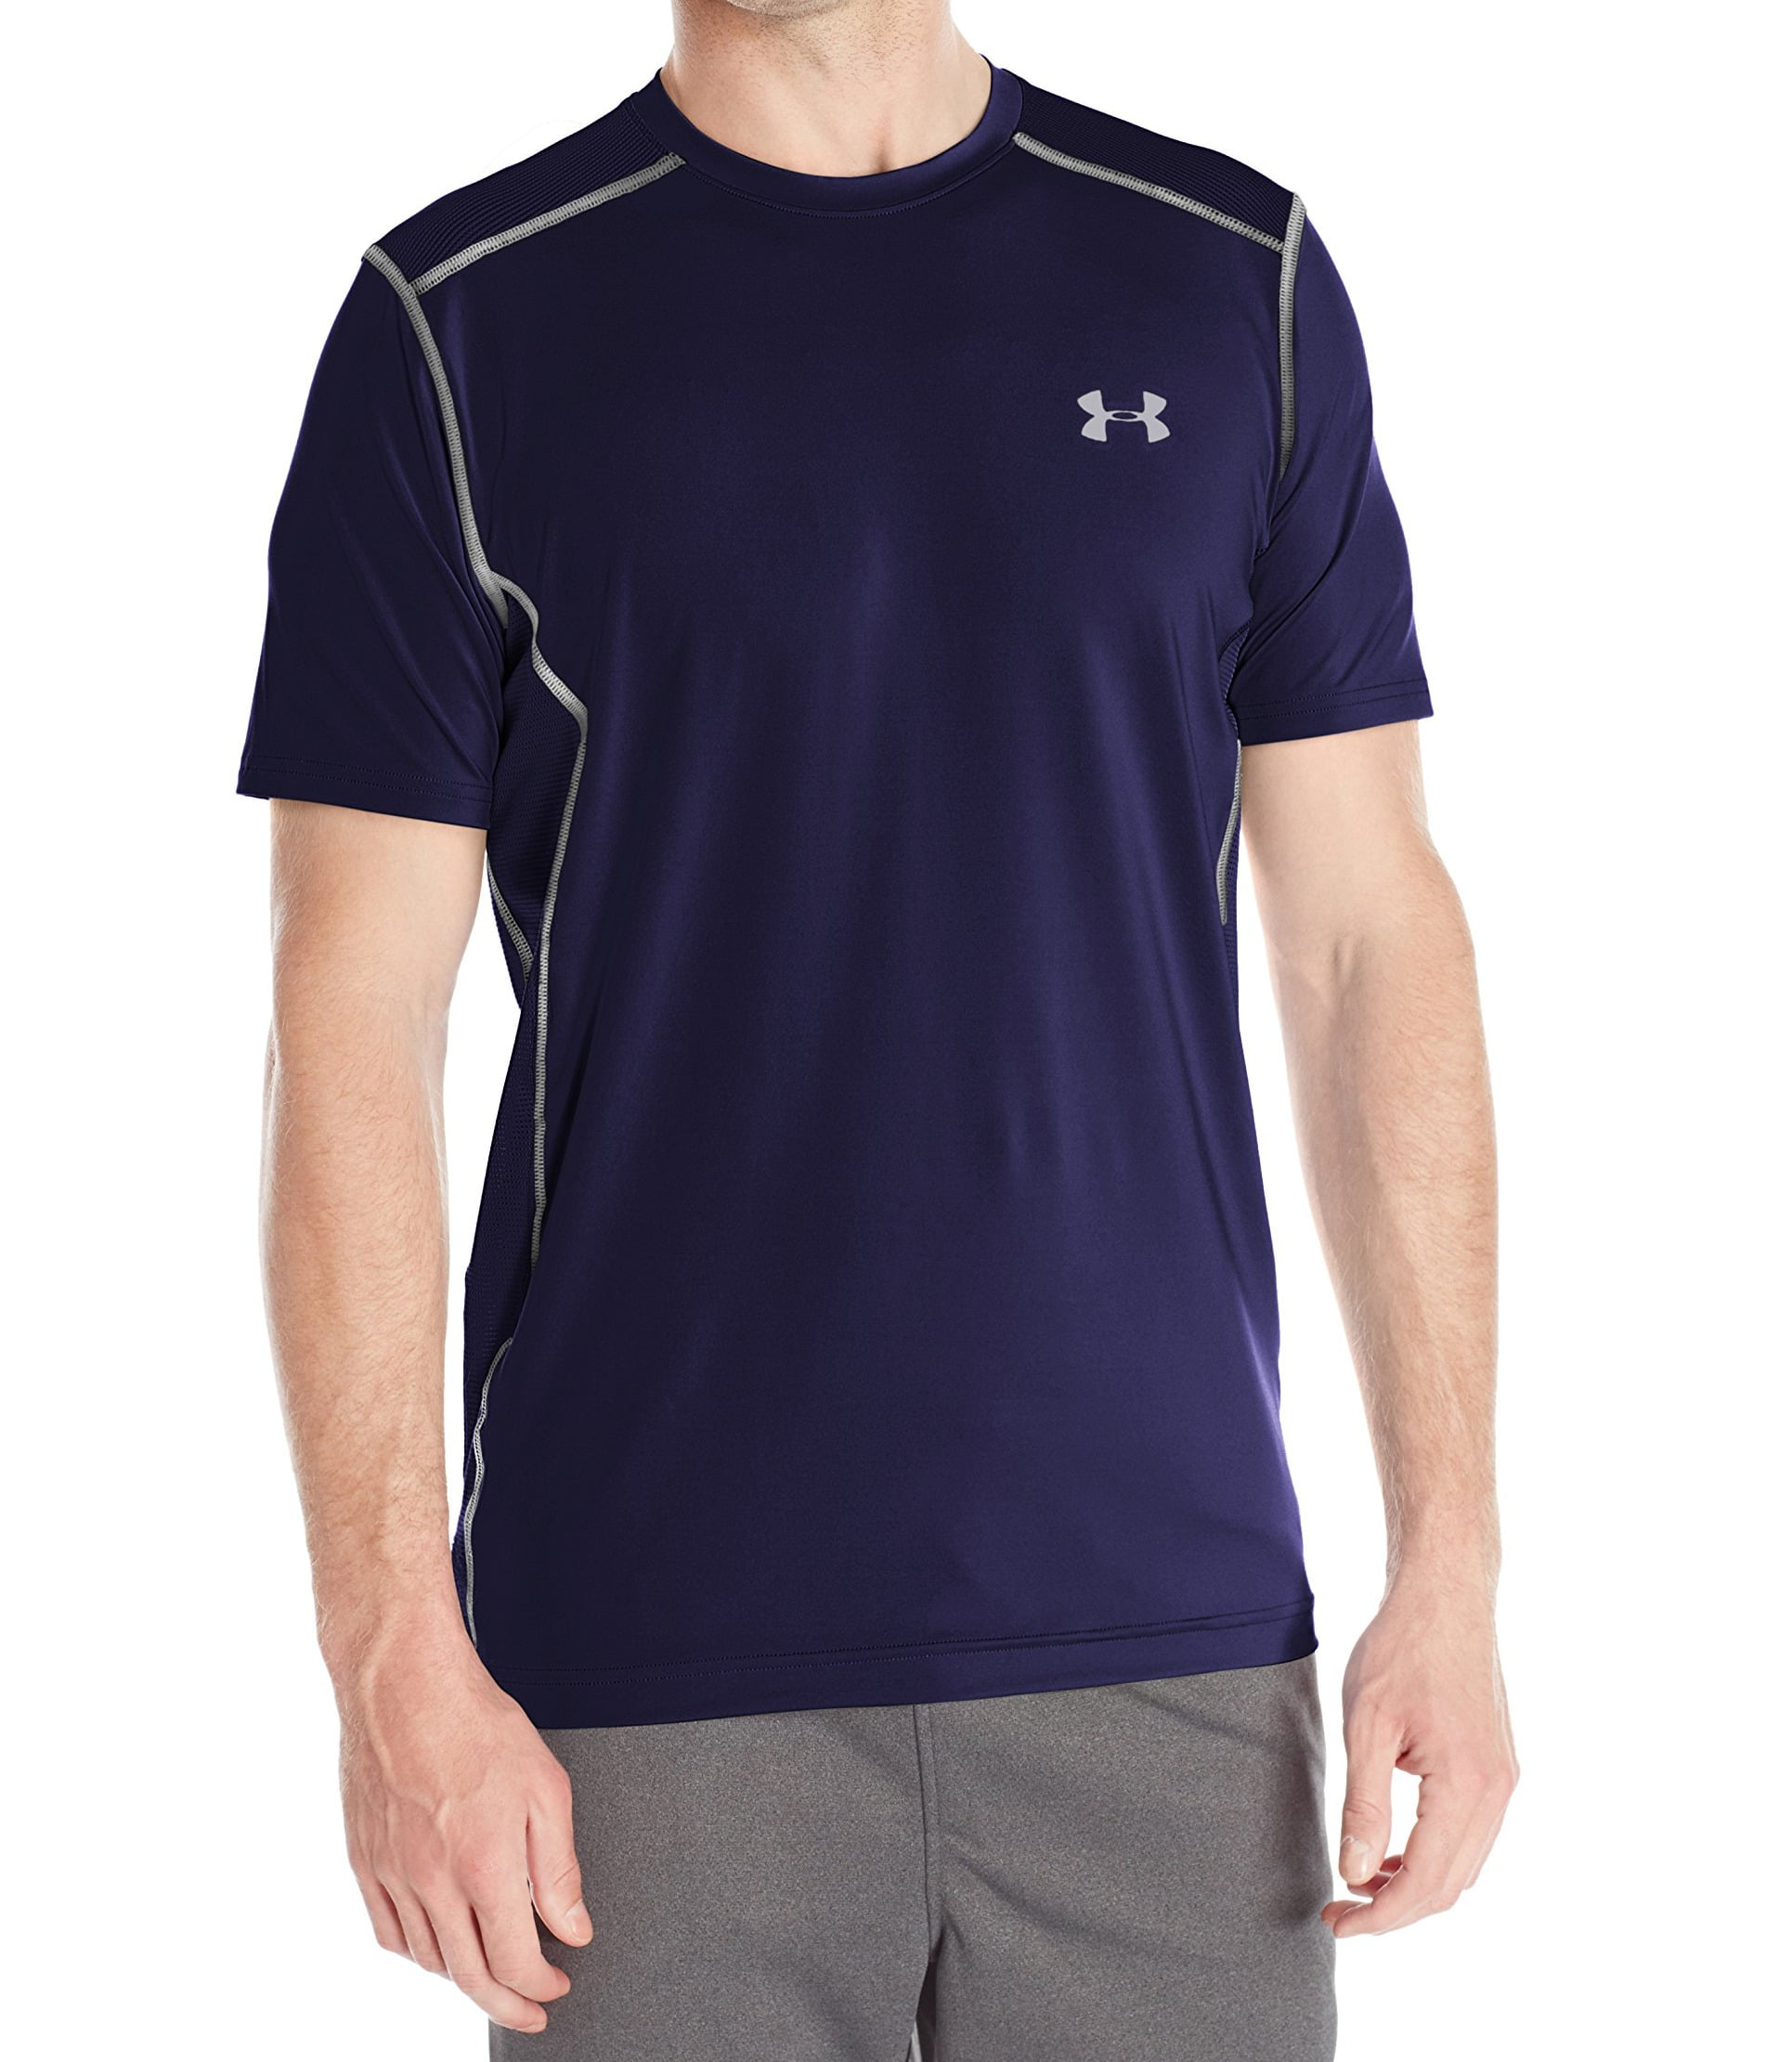 Under Armour - Under Armour NEW Navy Blue Mens Size Large L Tonal ...